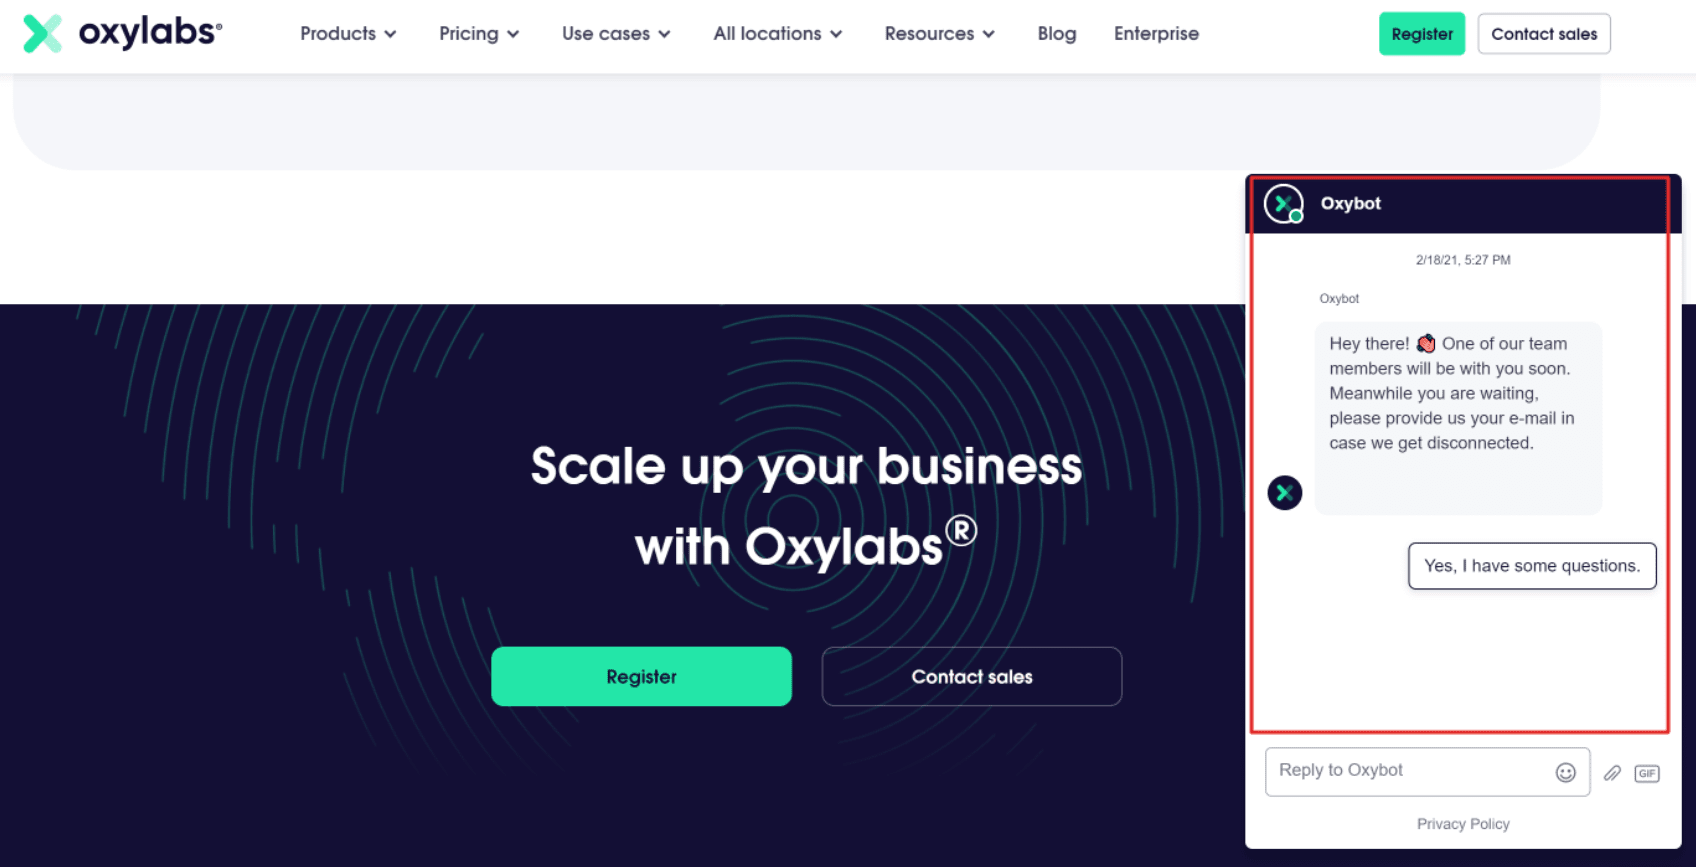 Oxylabs Customer Support